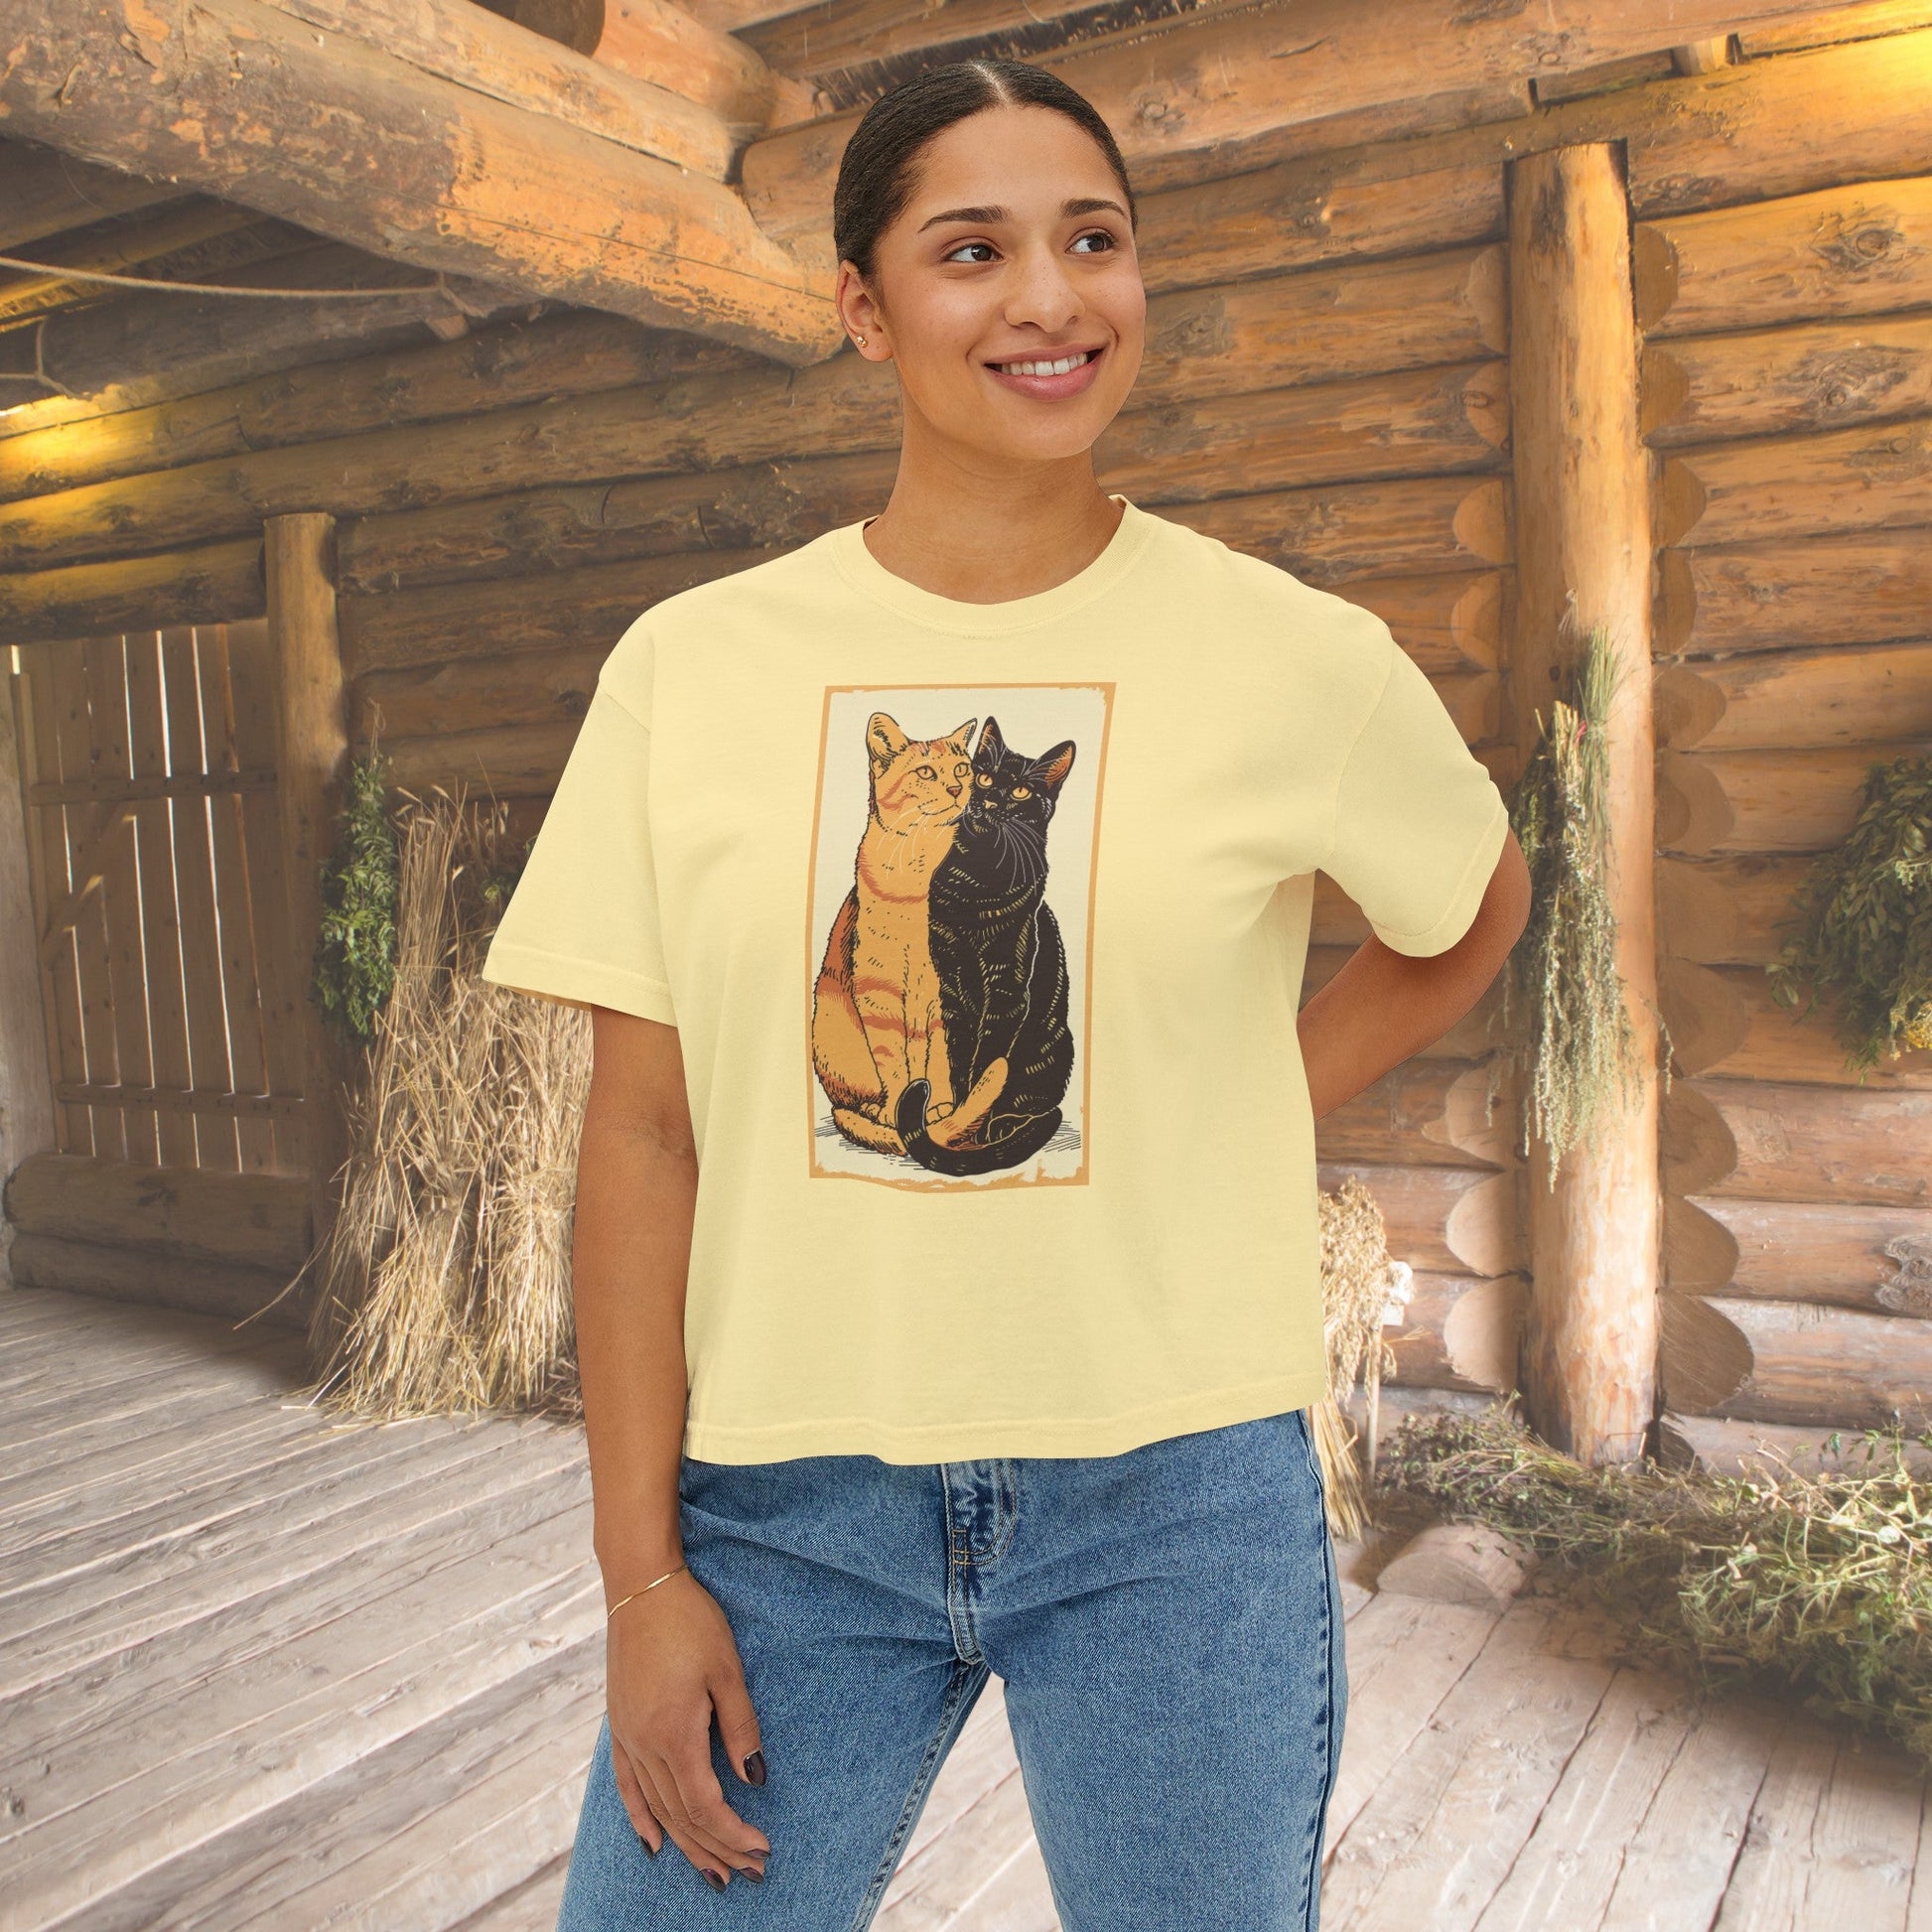 Vintage Style Pair of Cats on Crop T-shirt, Cute Black and Tabby Cat Shirt - FlooredByArt